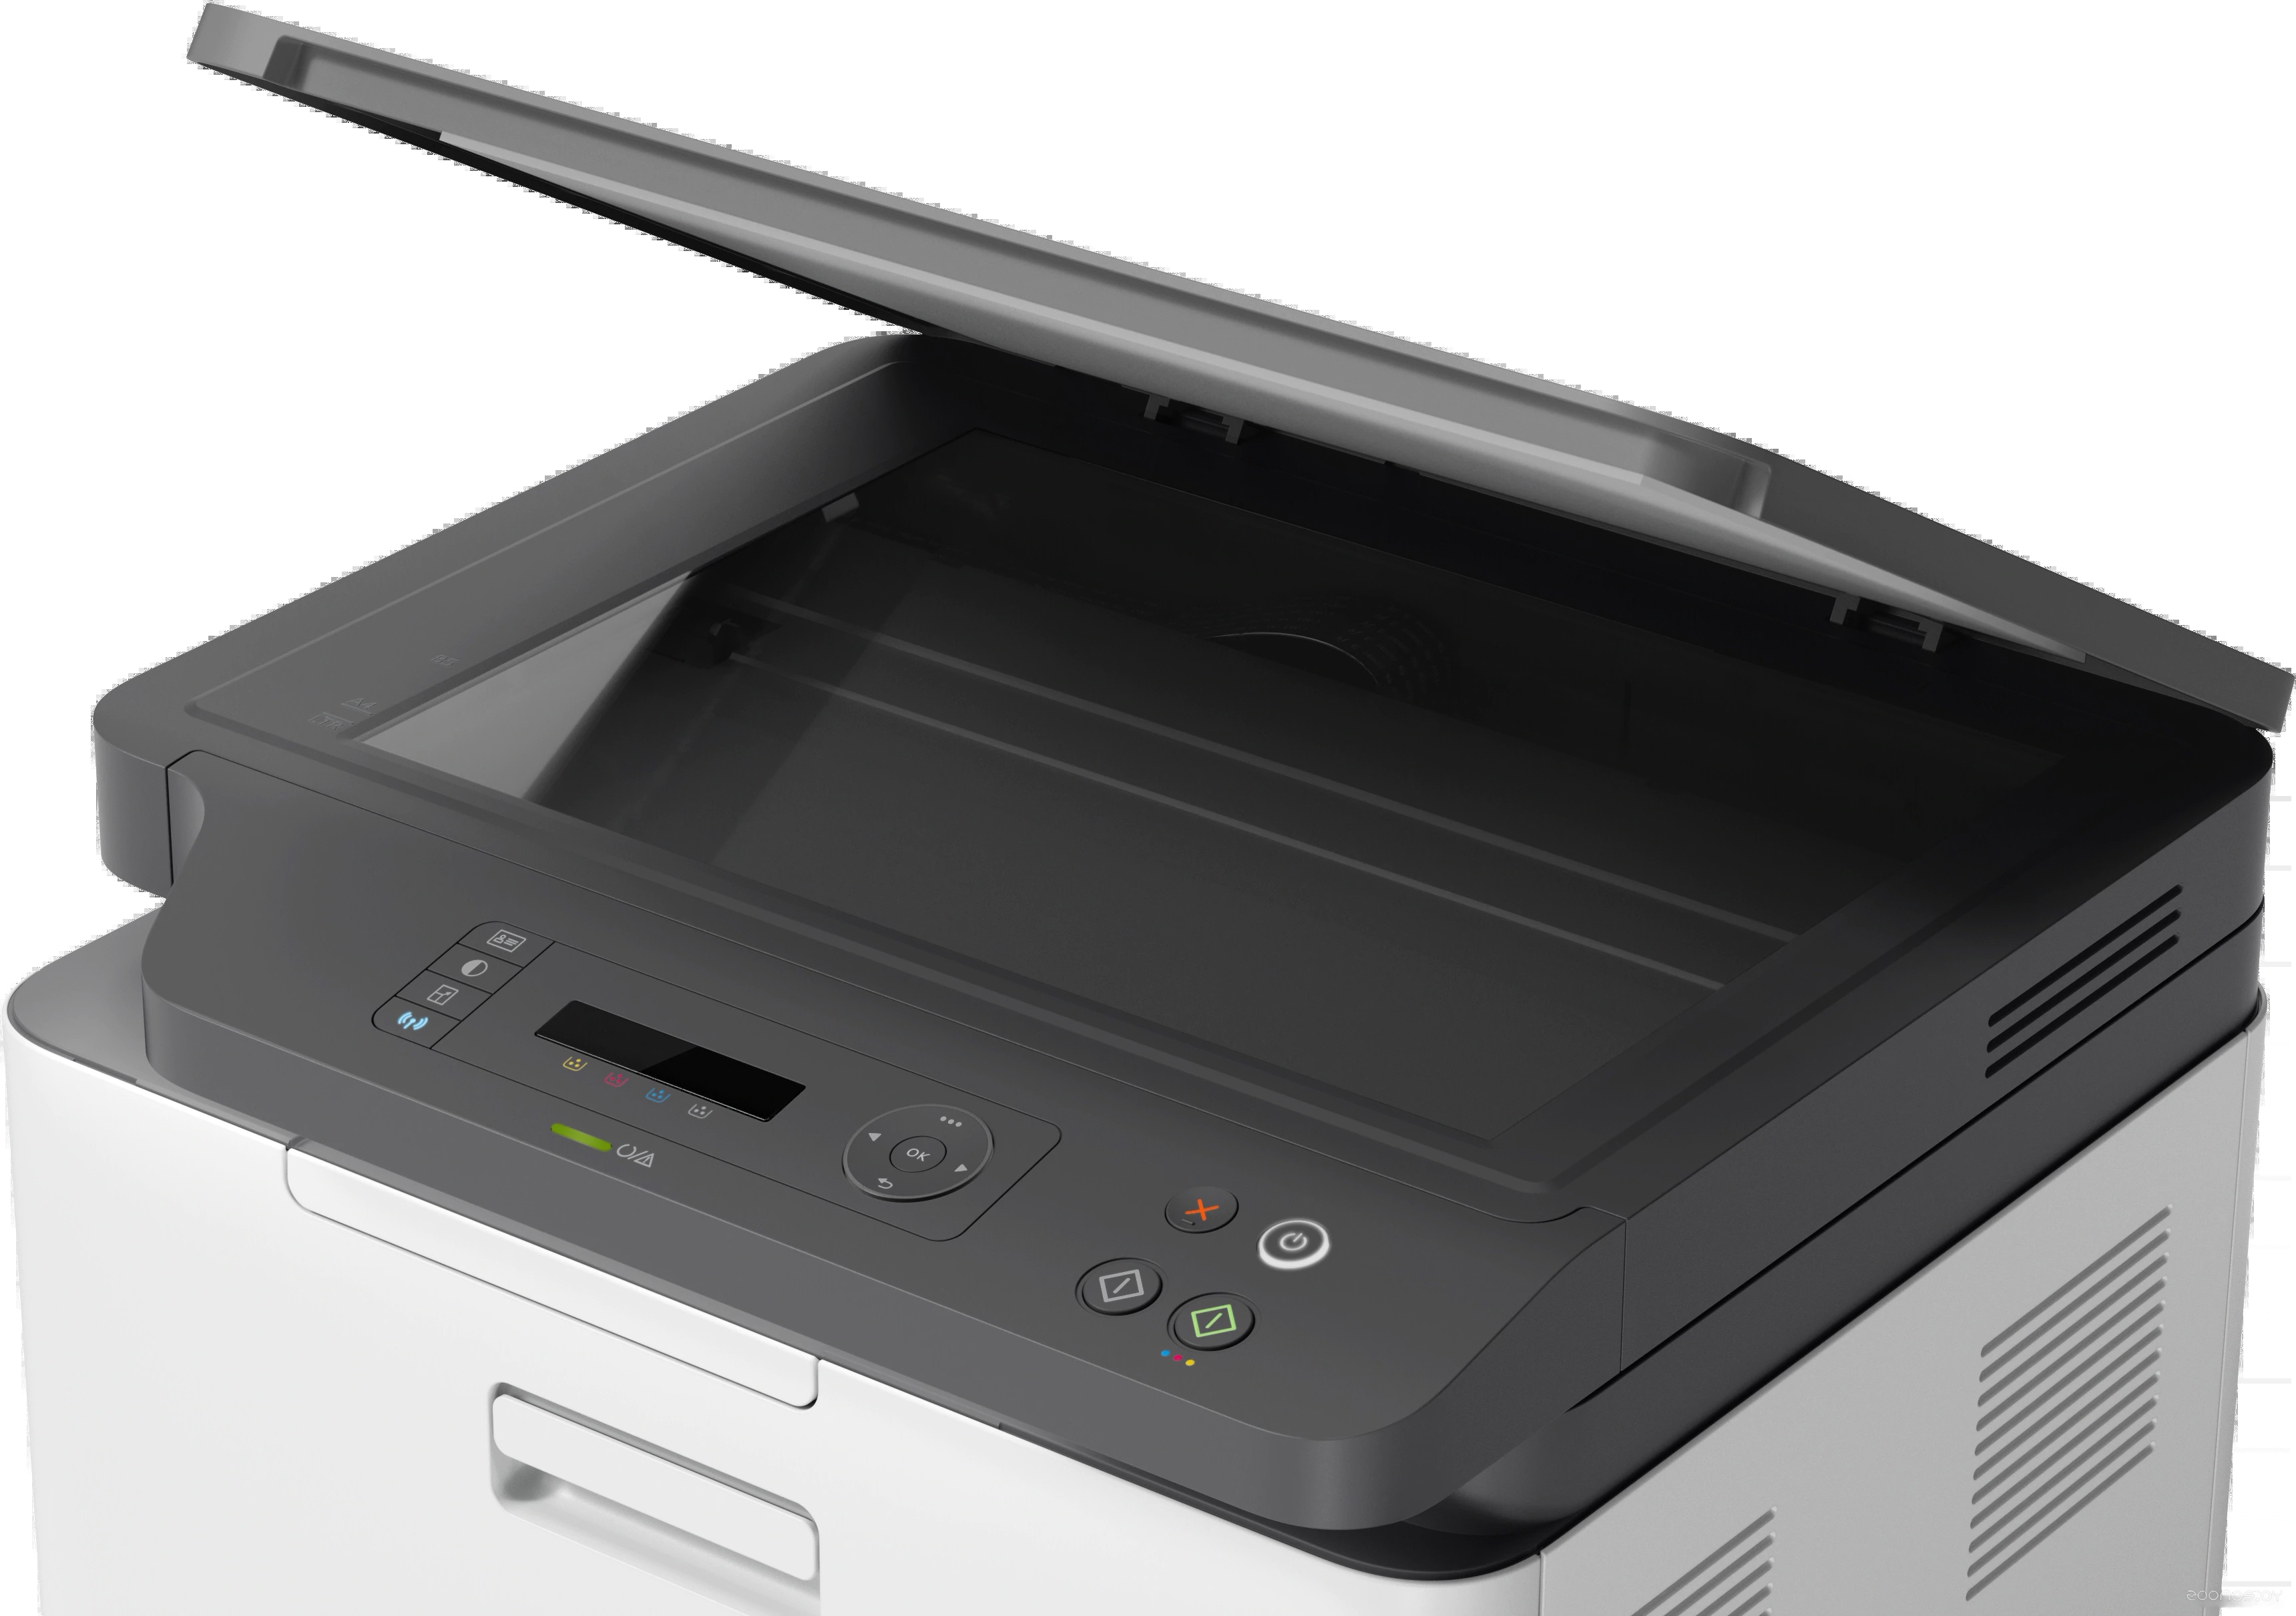  HP Color Laser 178nw     